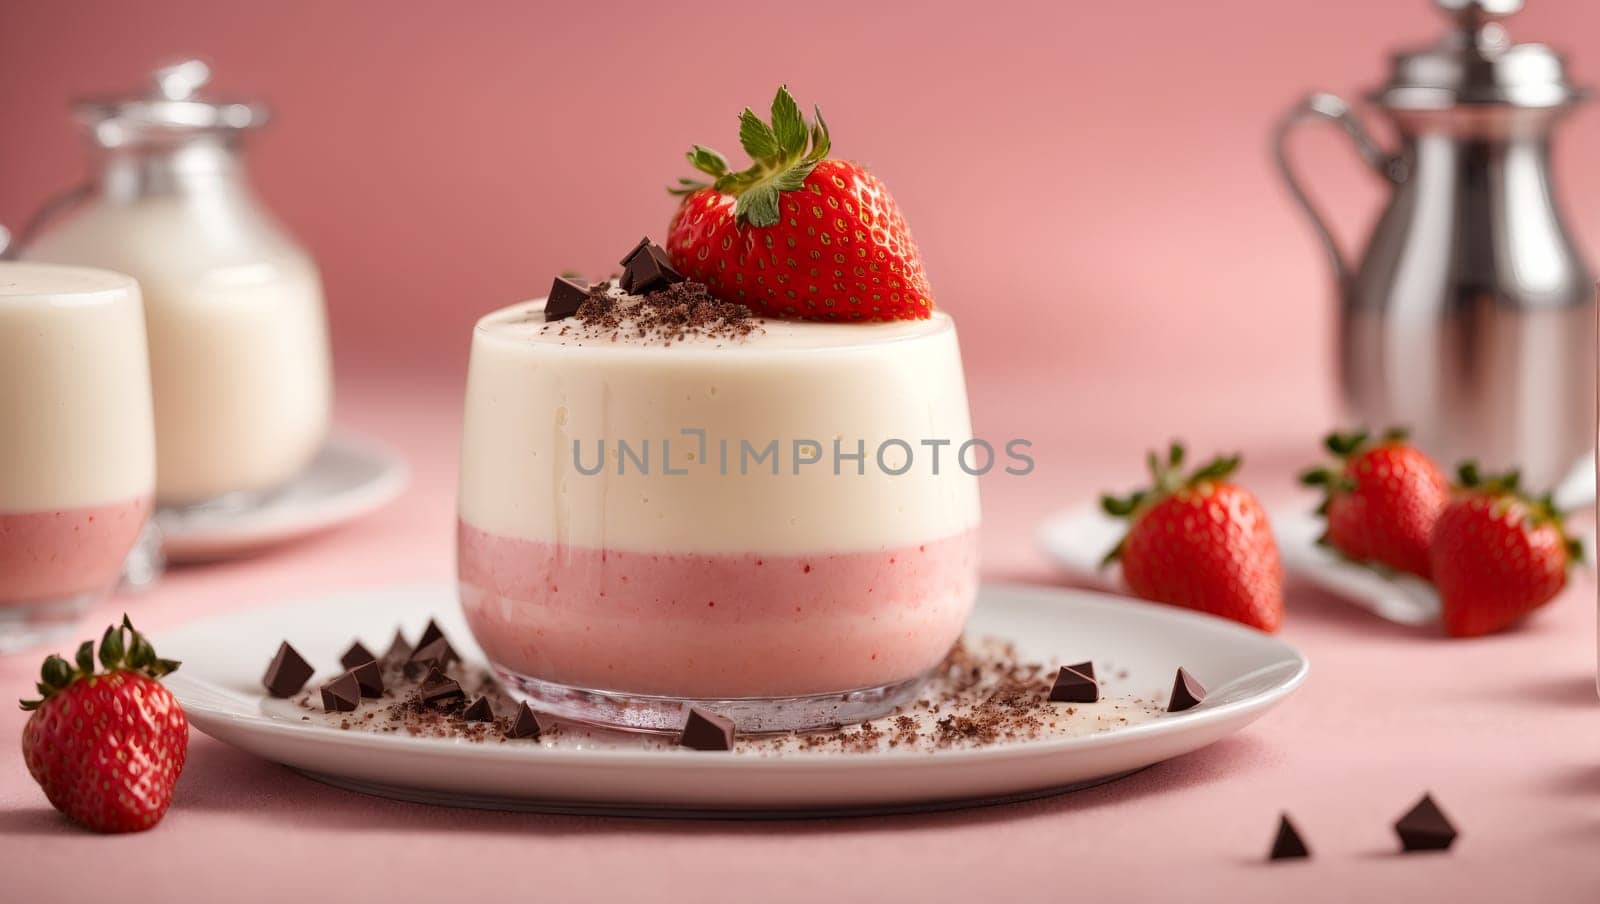 Panna cotta with strawberries, strawberry sauce and chocolate chunks on a pastel pink background, Valentine's Day, bright, delicate details